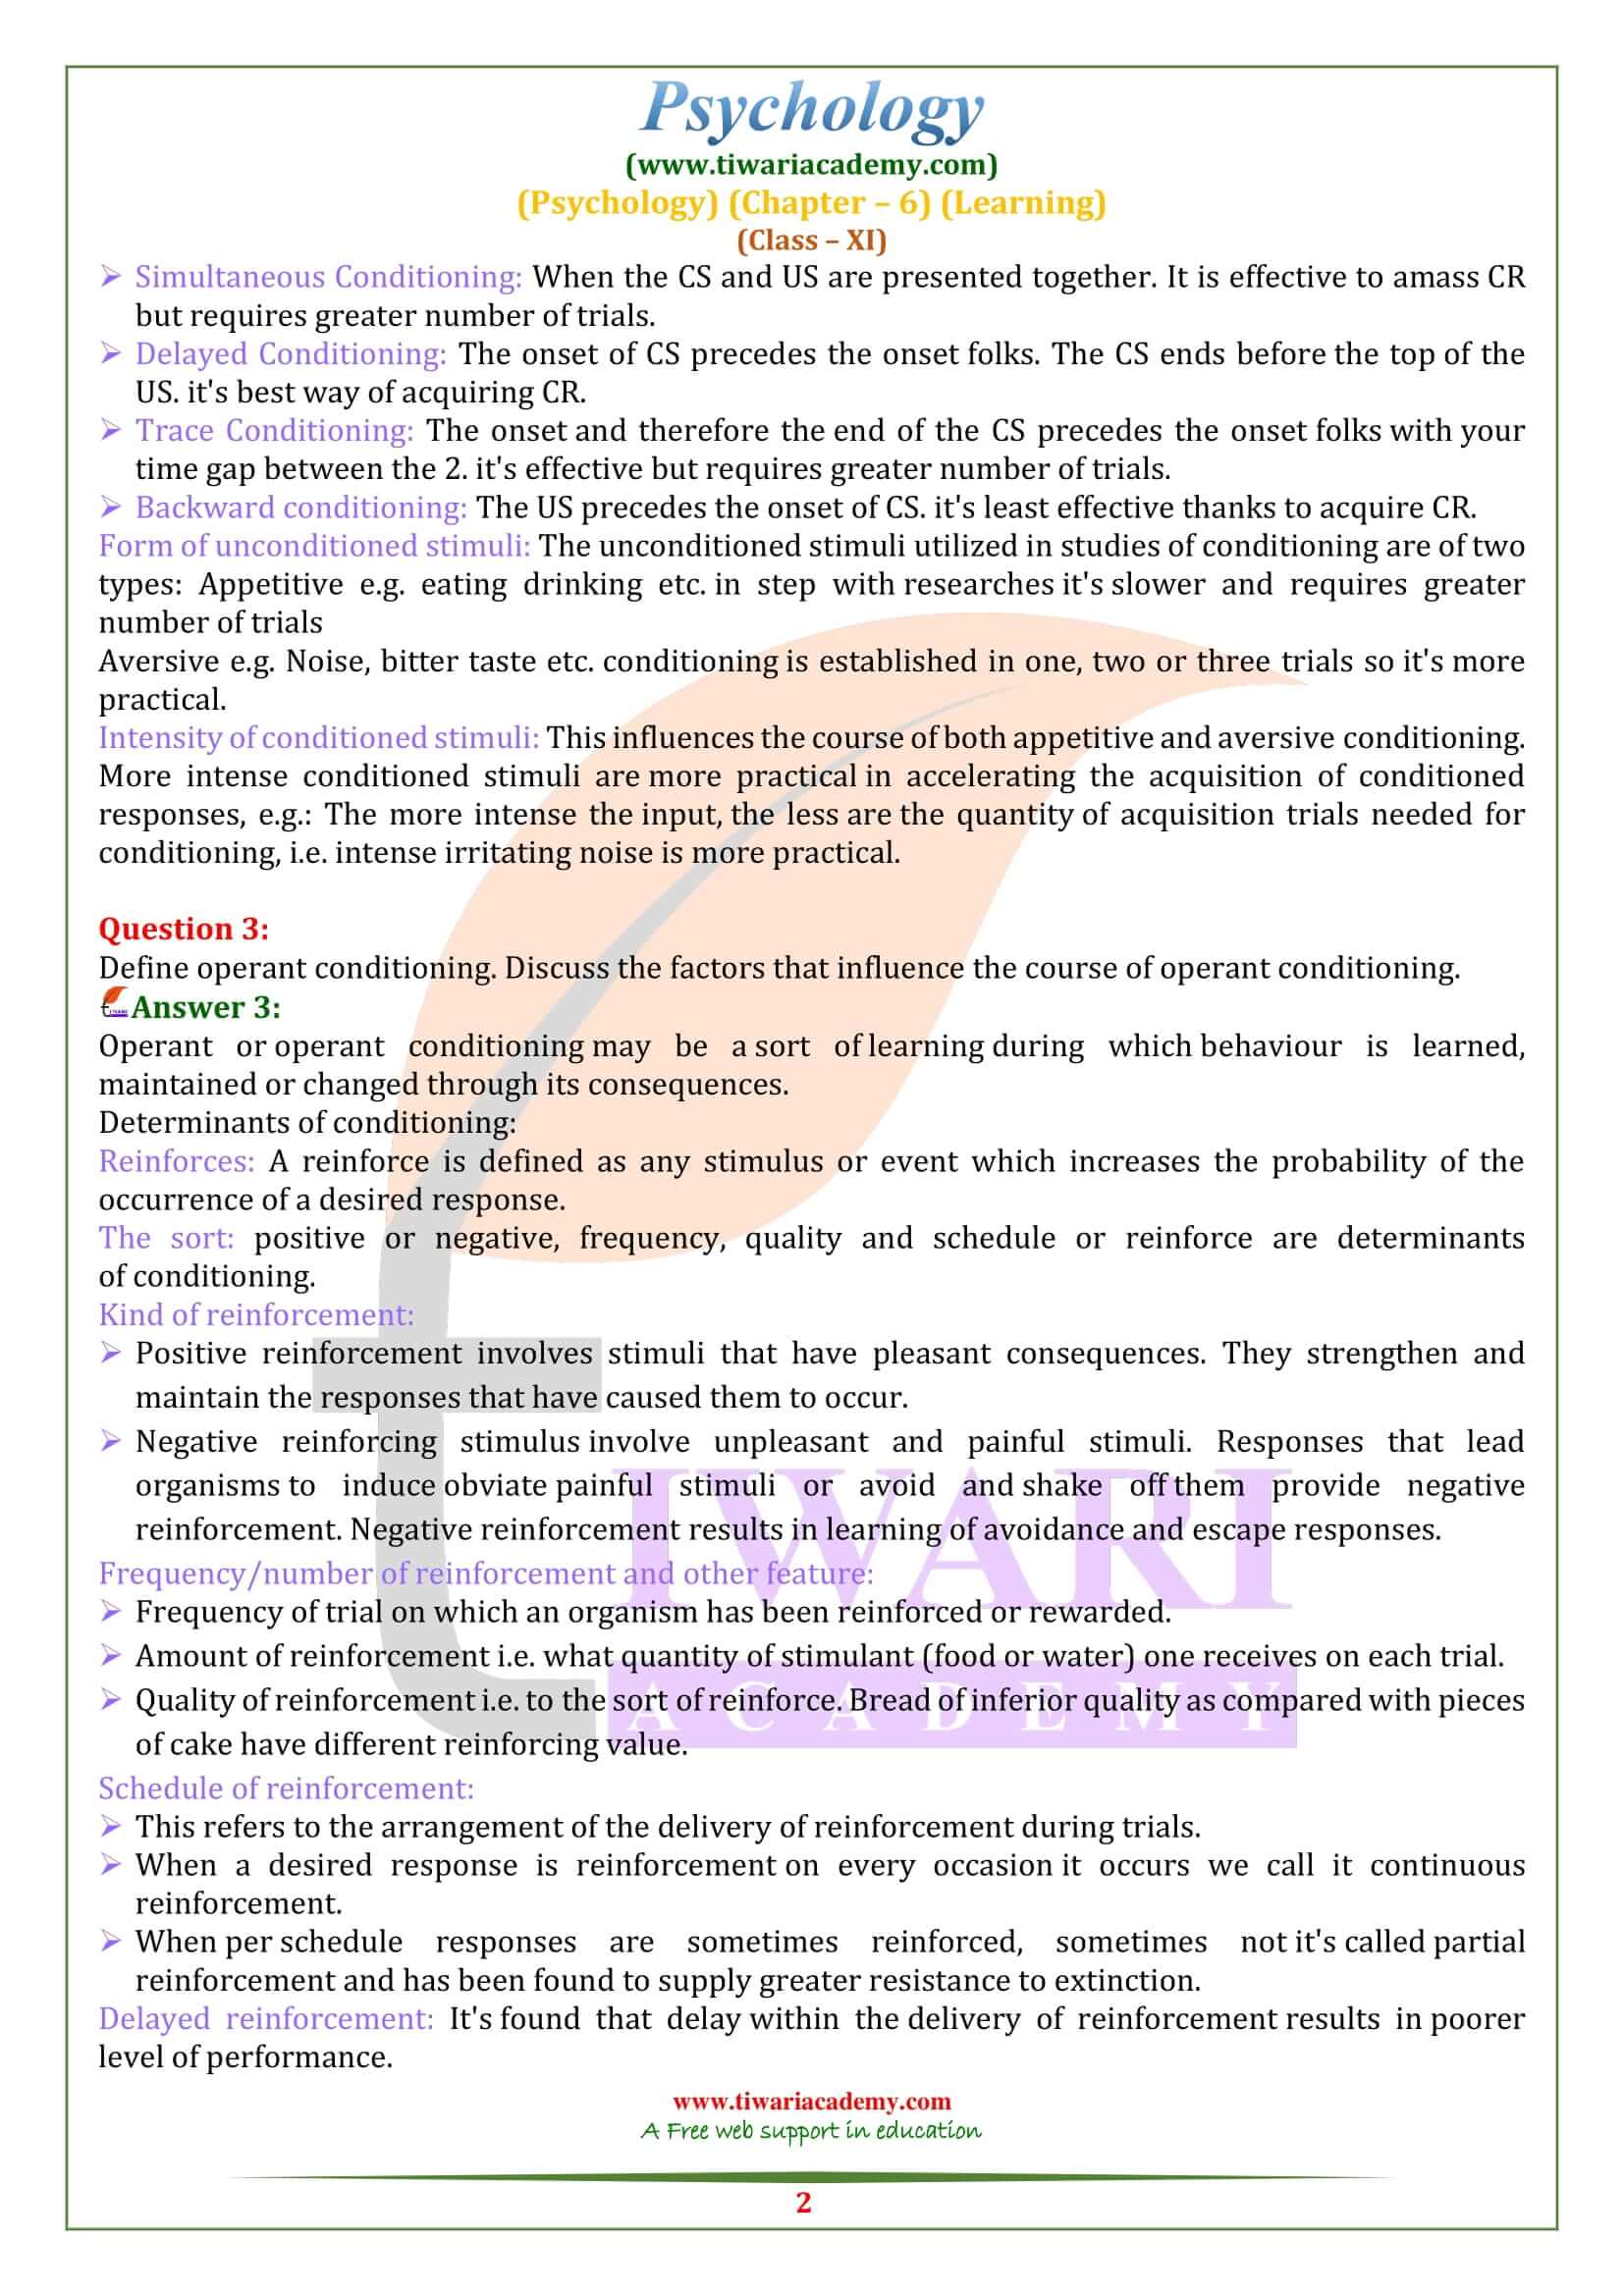 NCERT Solutions for Class 11 Psychology Chapter 6 in English Medium